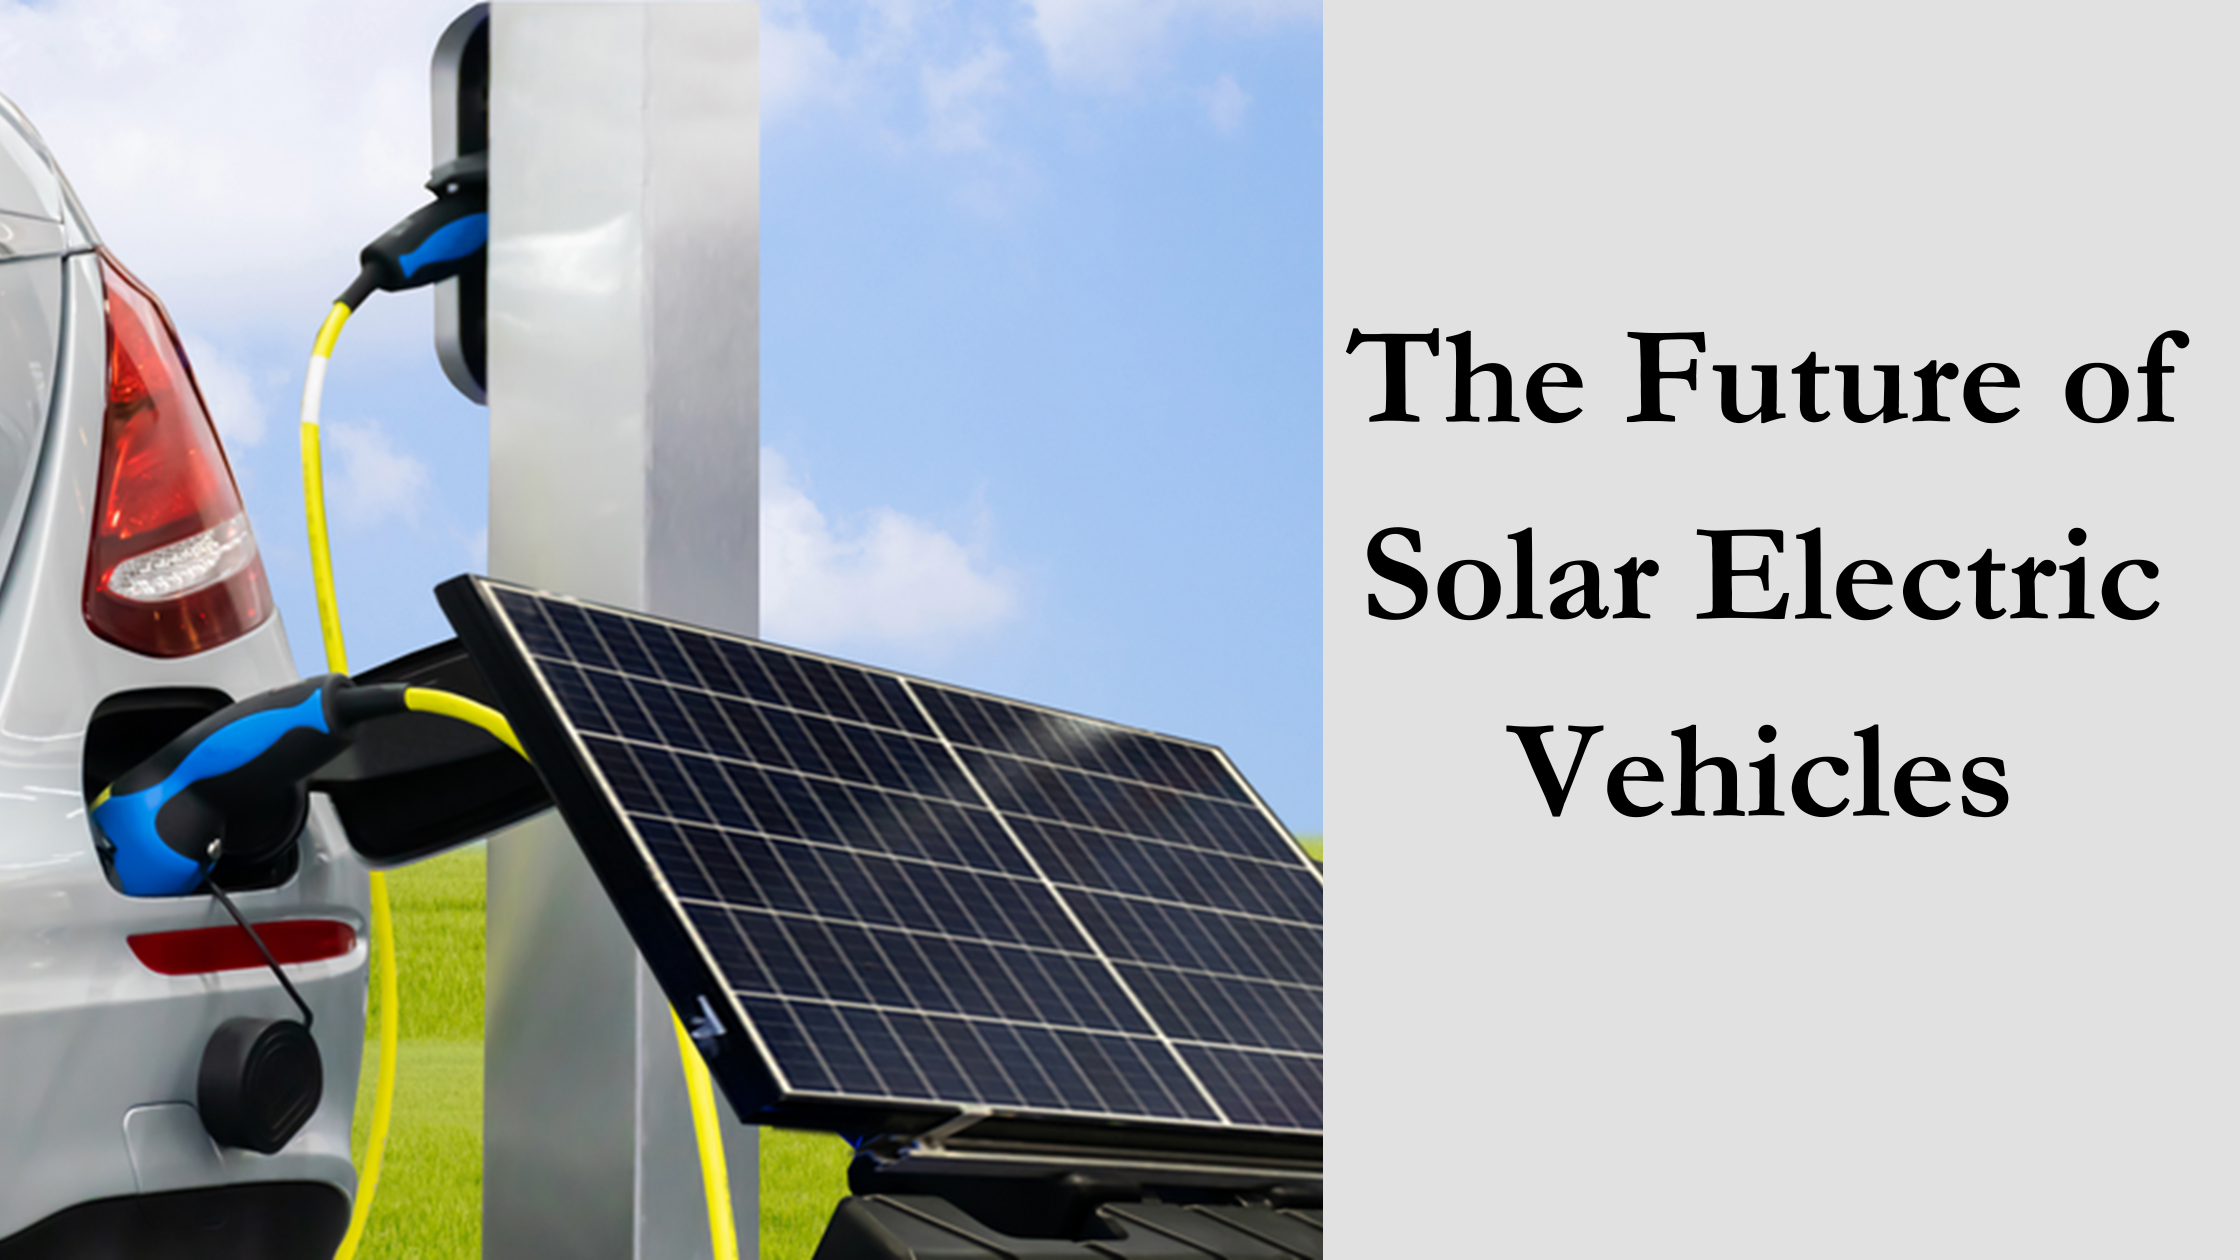 The Future of Solar Electric Vehicles